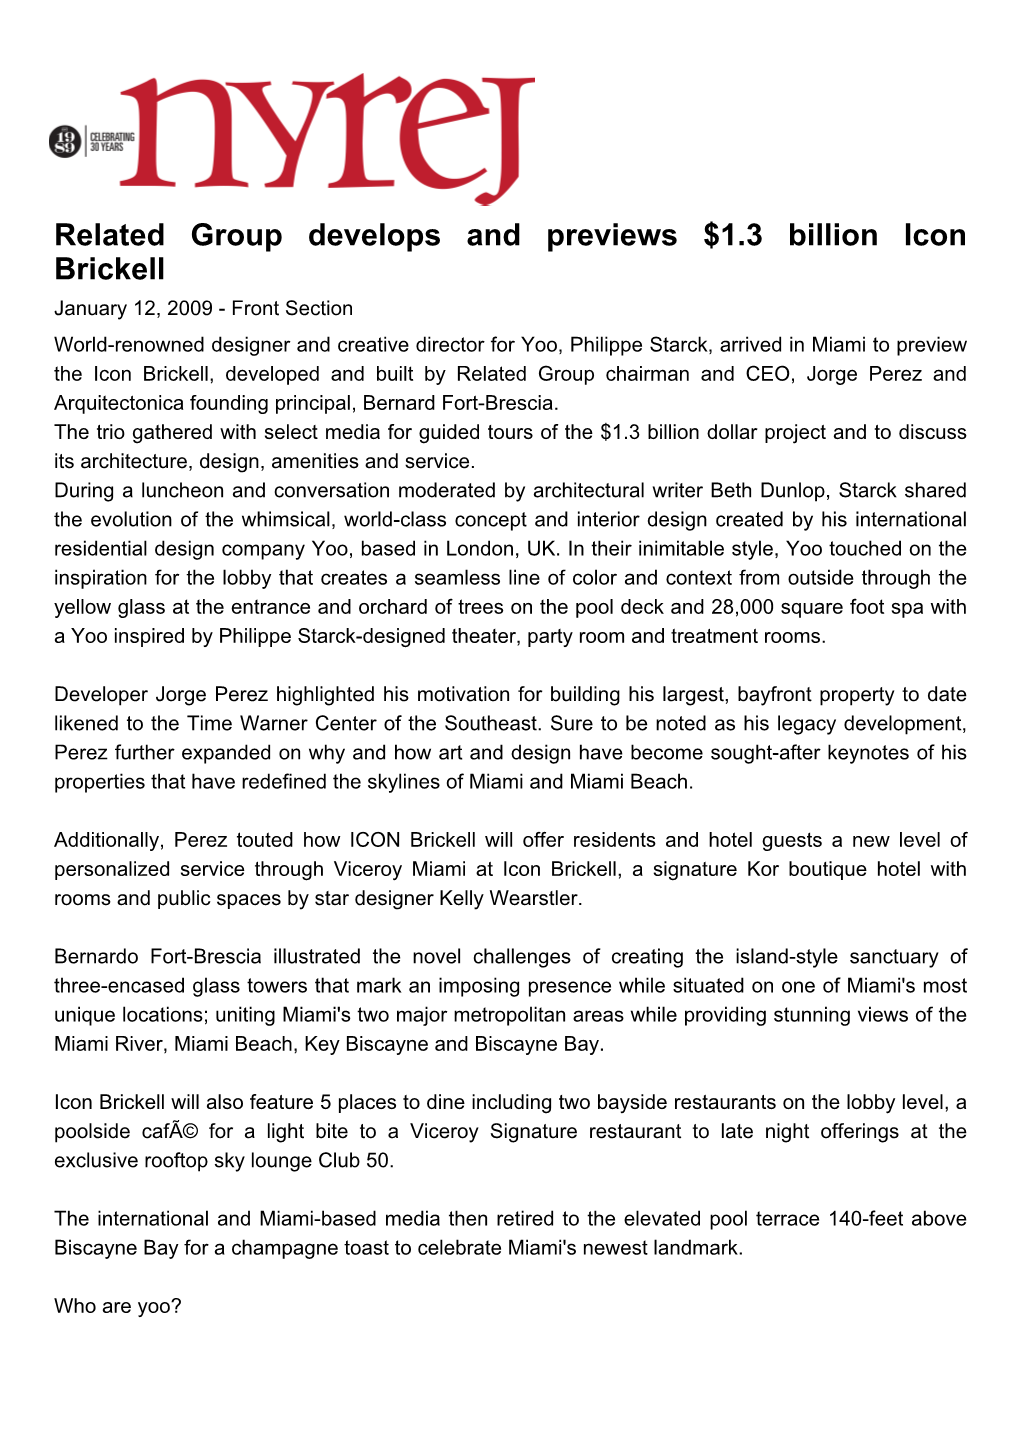 Related Group Develops and Previews $1.3 Billion Icon Brickell